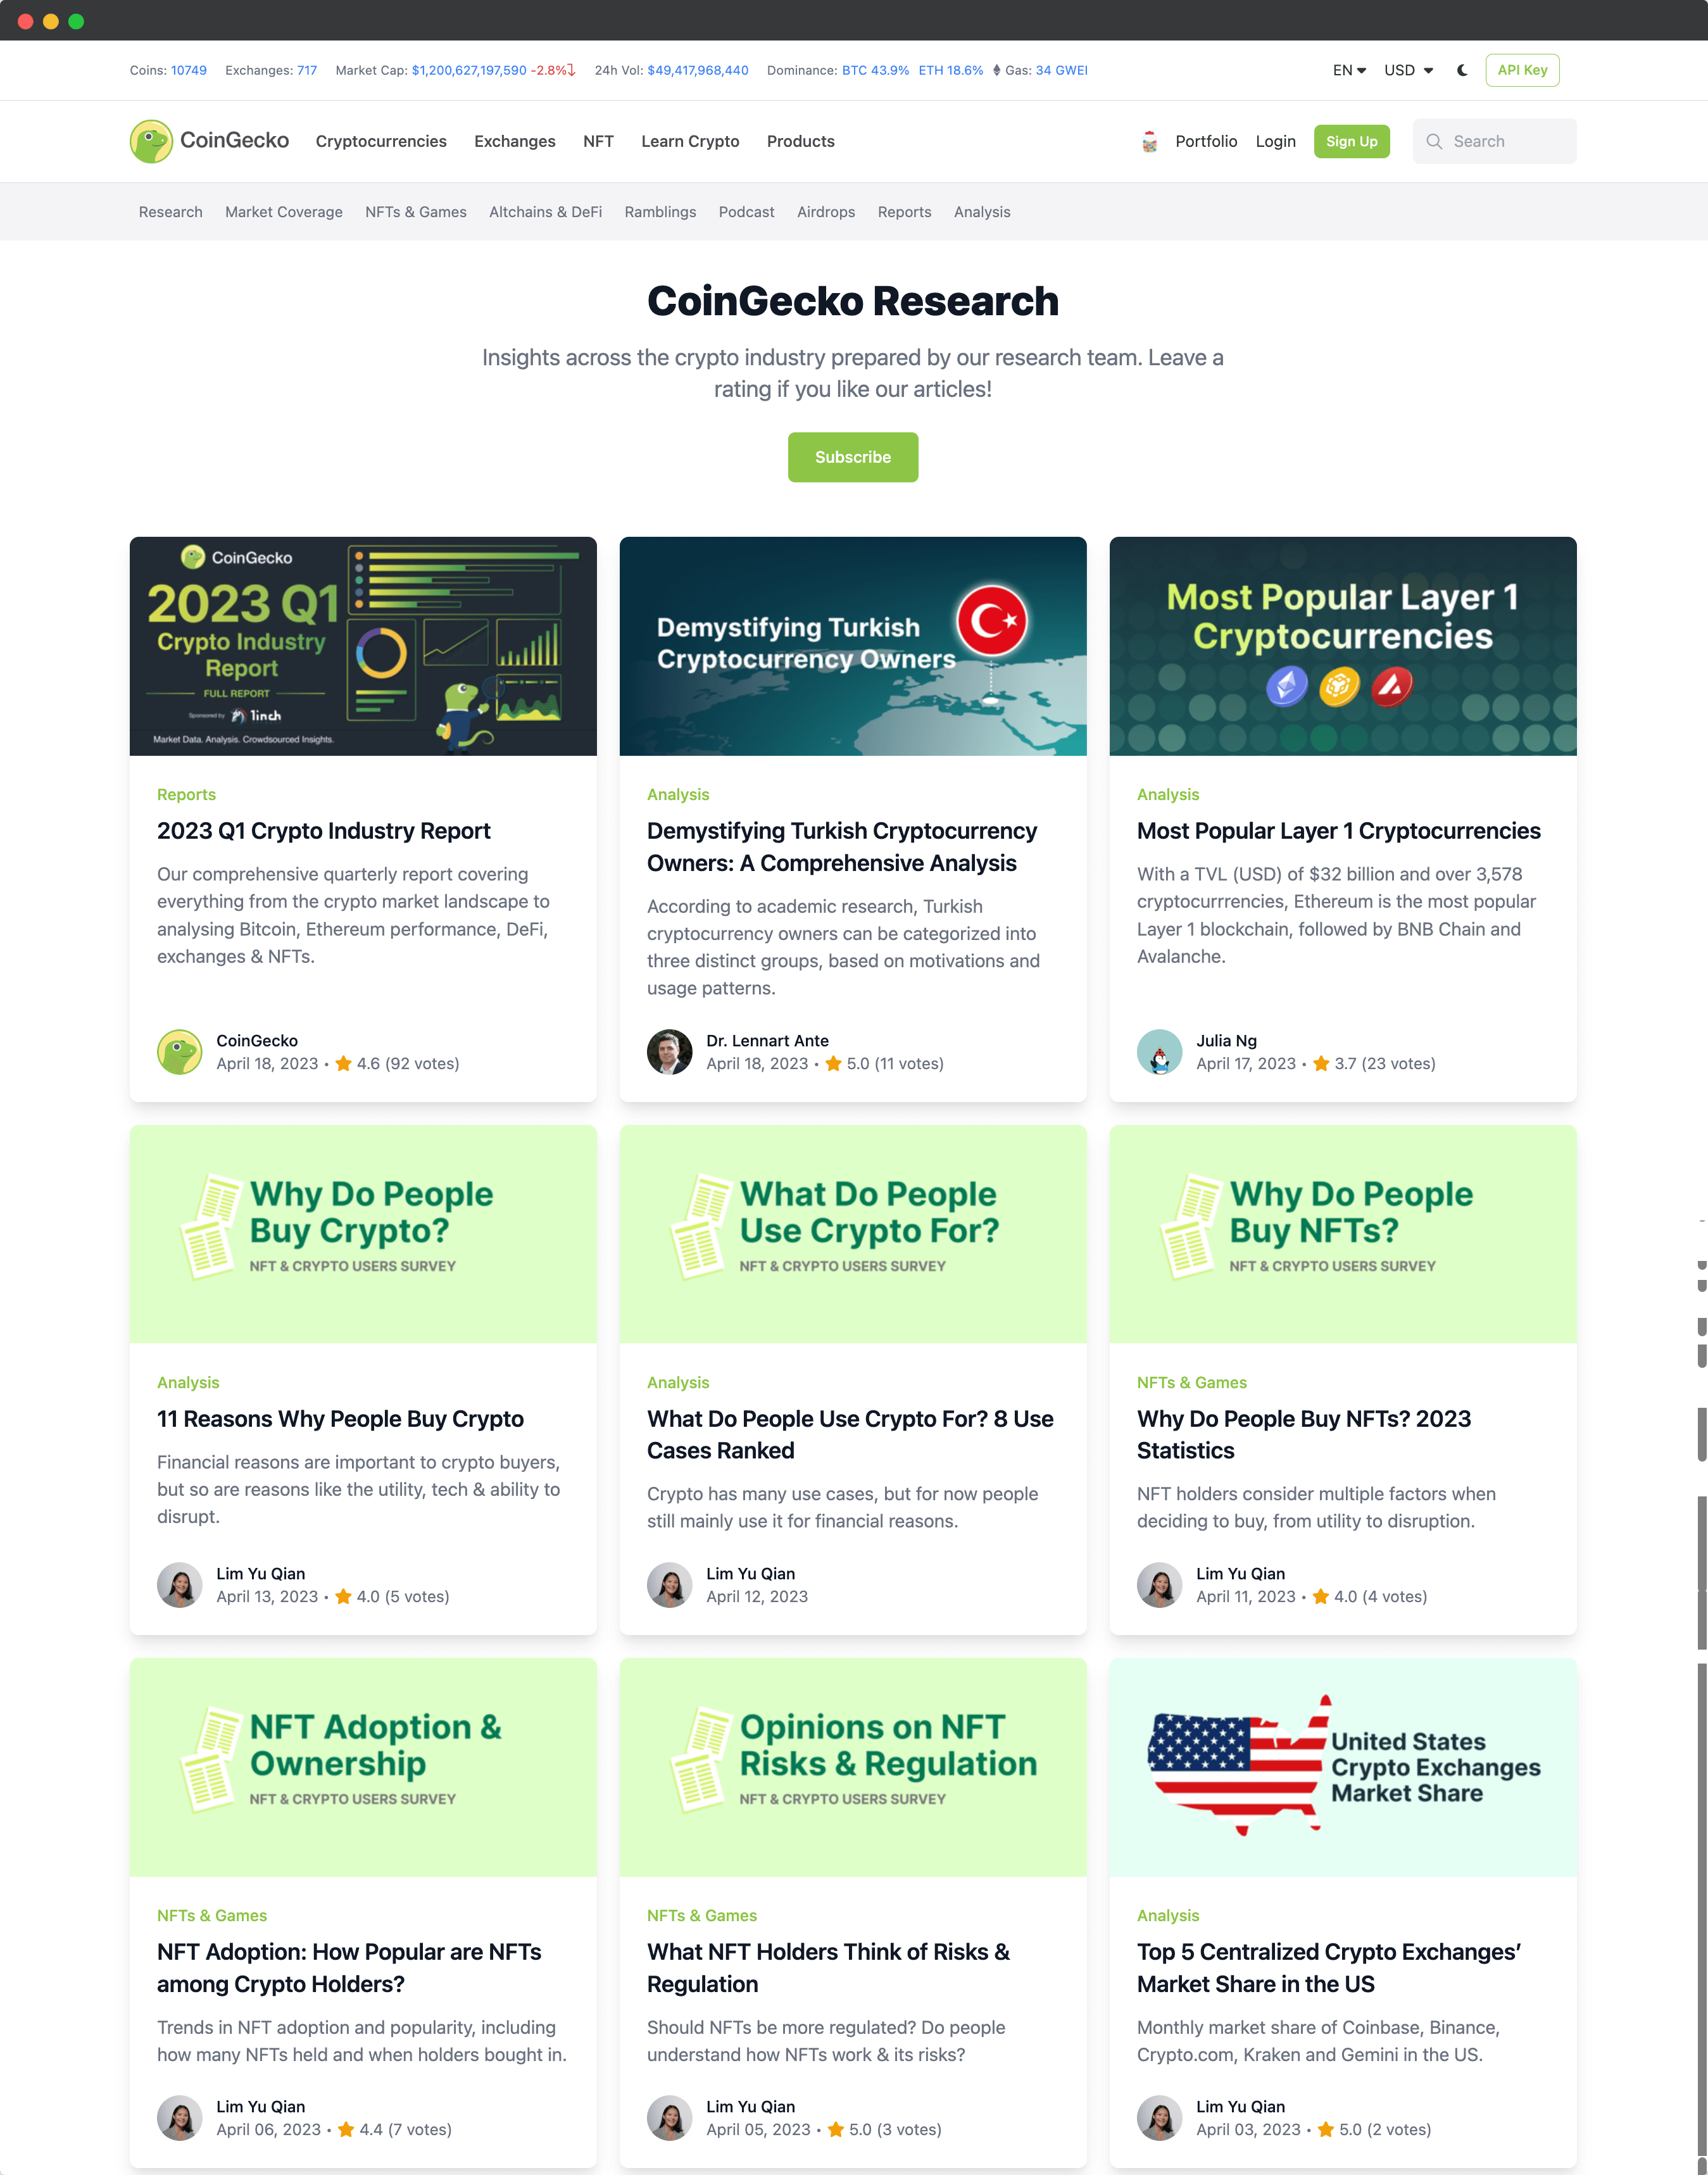 Coingecko blog and research section screenshot